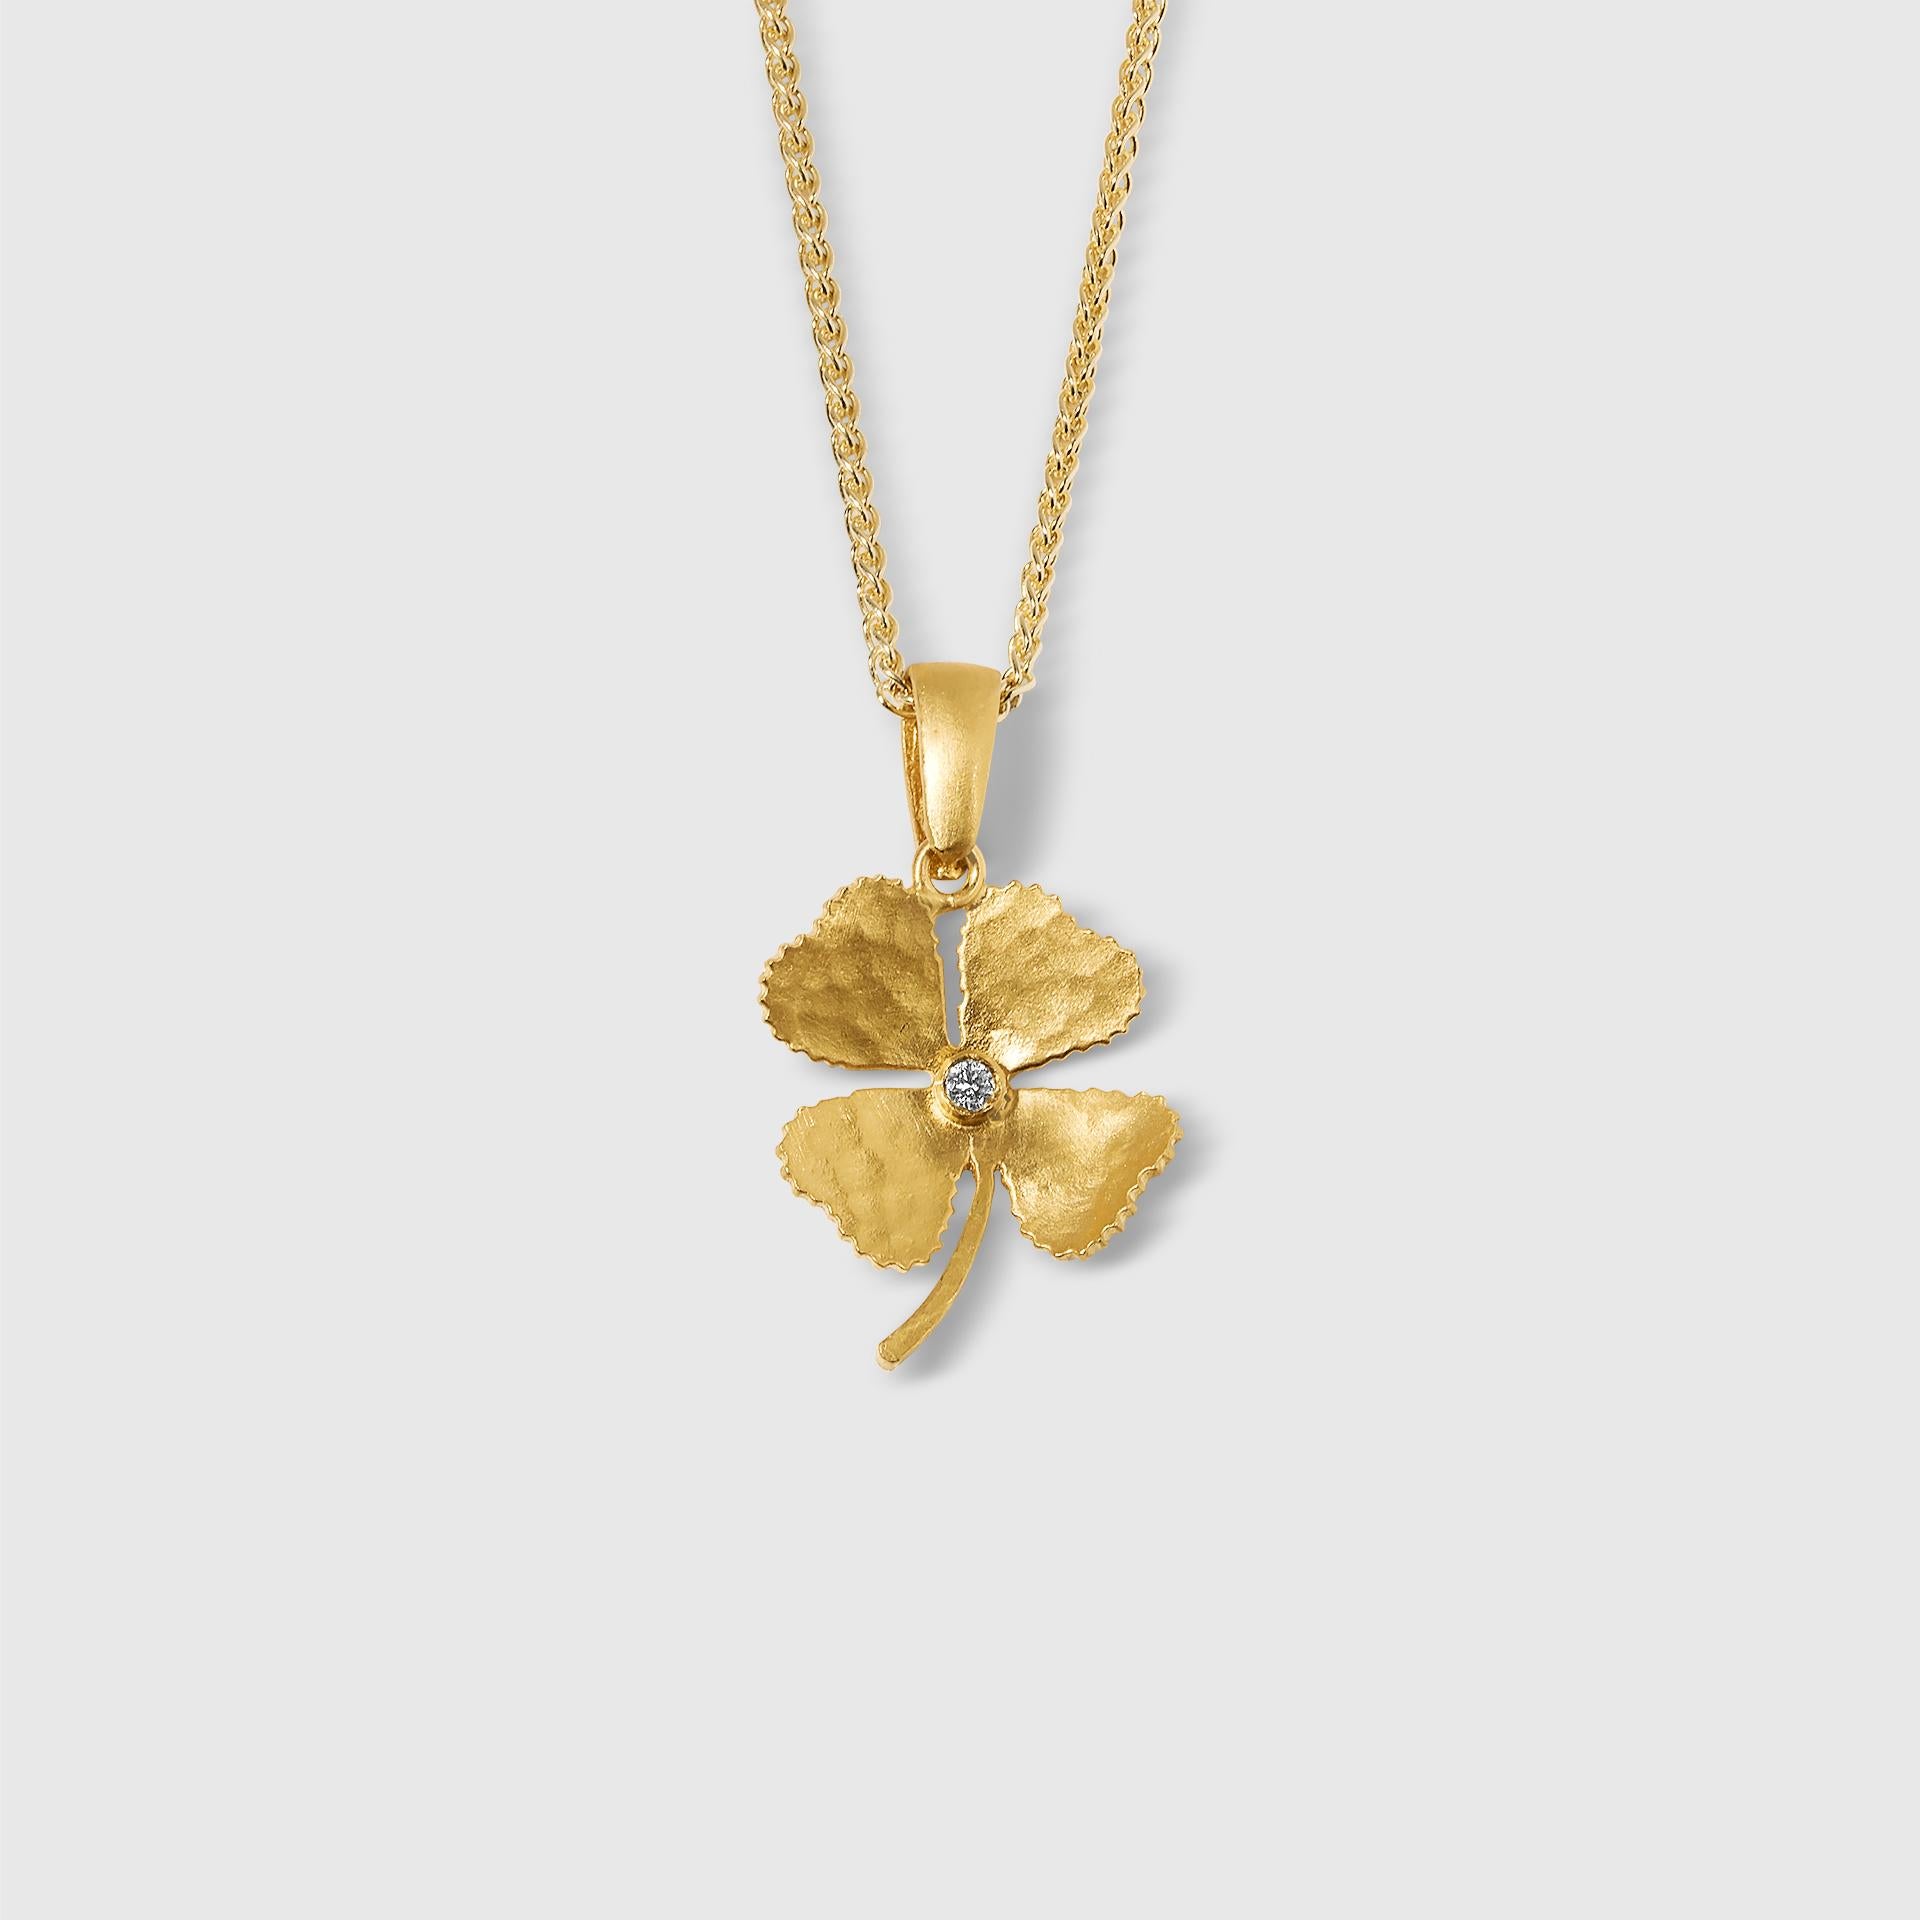 Small, Four Leaf Clover Charm Pendant Necklace with Center Diamond, 24kt Solid Gold by Prehistoric Works of Istanbul, Turkey. Size small, 15.5mm x 26mm, Weighs 3.2g of 24kt gold, diamond is 0.02 ct. Pendant comes with a 16